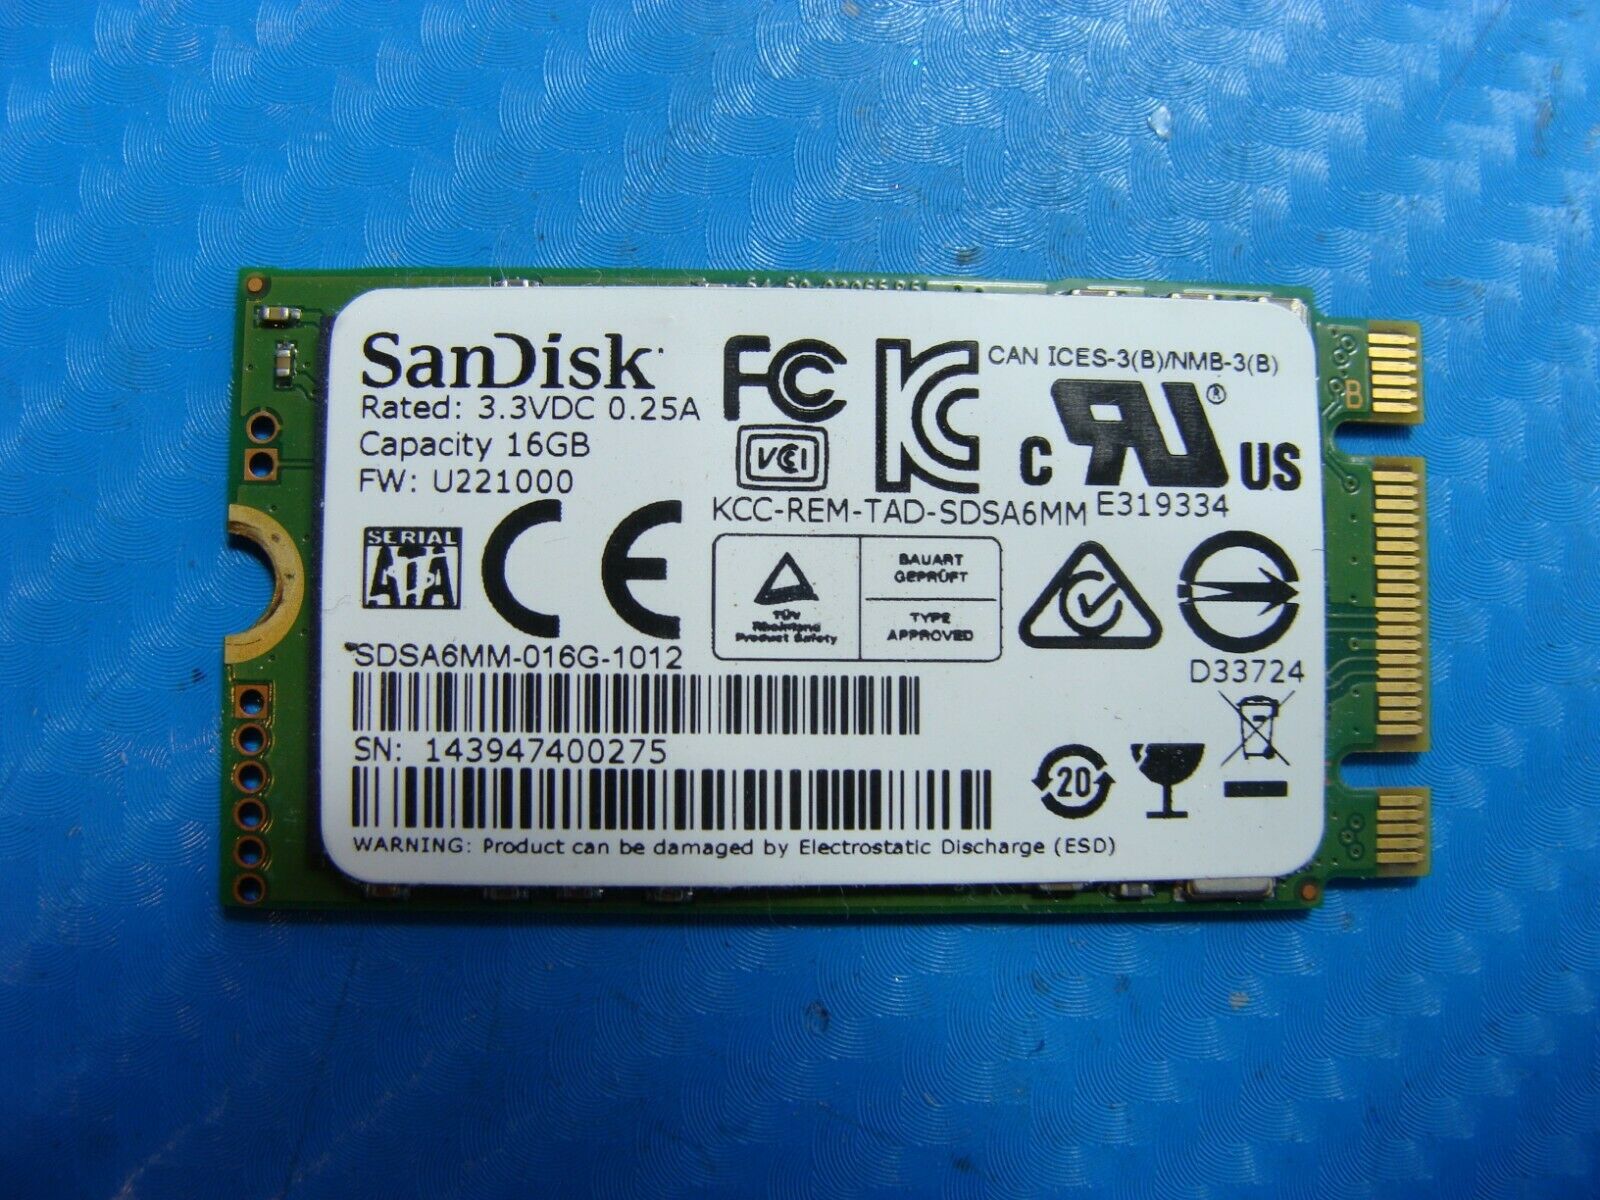 Dell 7310 SanDisk 16GB SATA M.2 SSD Solid State Drive SDSA6MM-016G-1012 - Laptop Parts - Buy Authentic Computer Parts - Top Seller Ebay